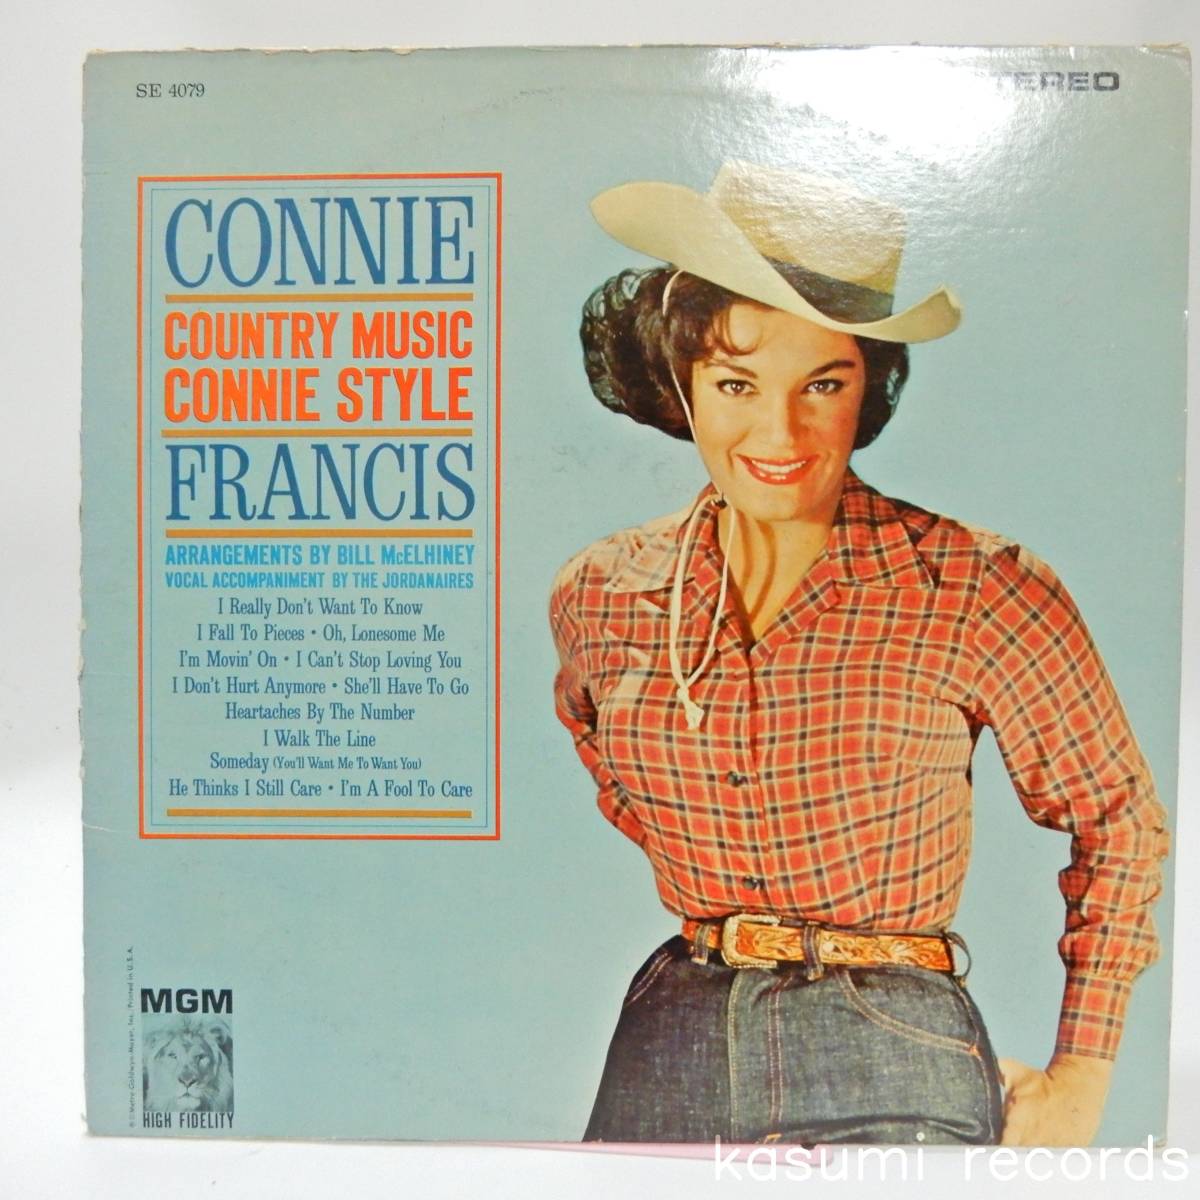 【US-ORIG. LP】CONNIE FRANCIS/COUNTRY MUSIC(並下品,ジョニー・キャッシュカバー)の画像1